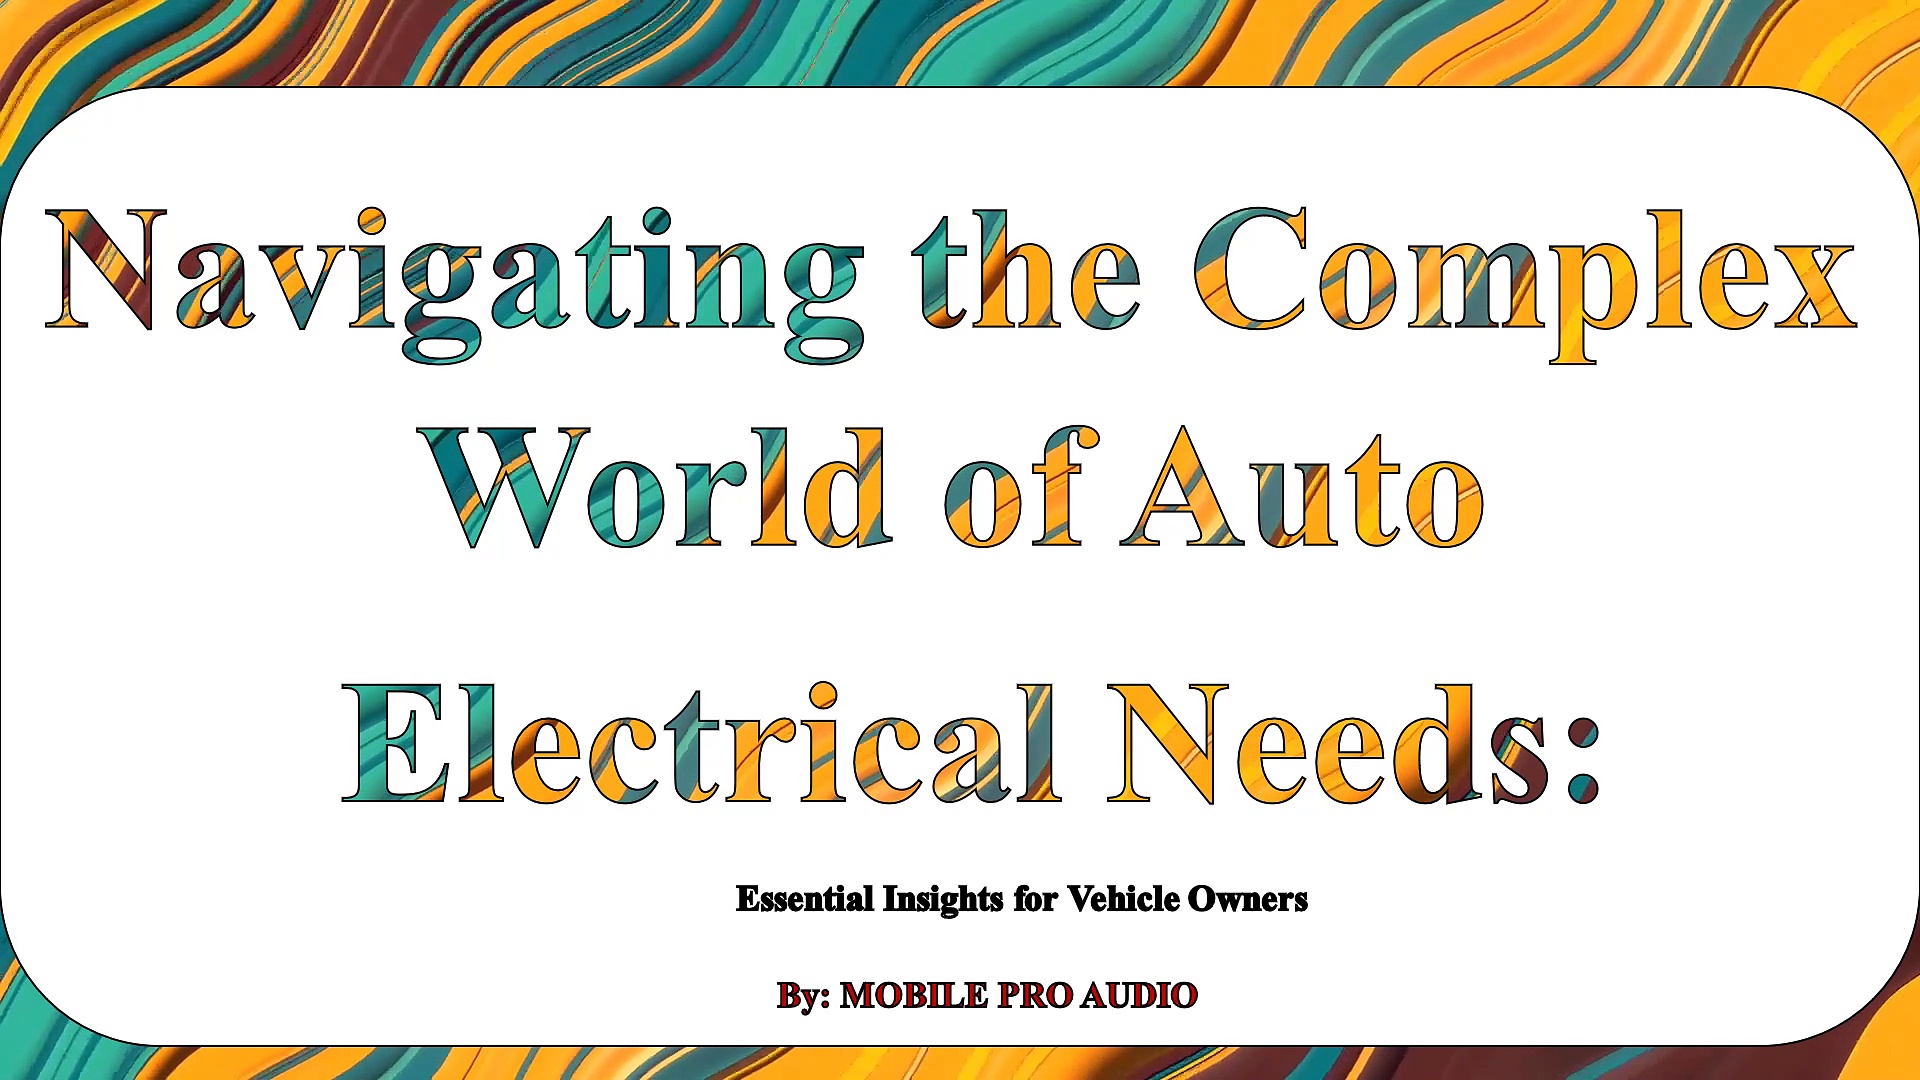 Navigating the Complex World of Auto Electrical Needs